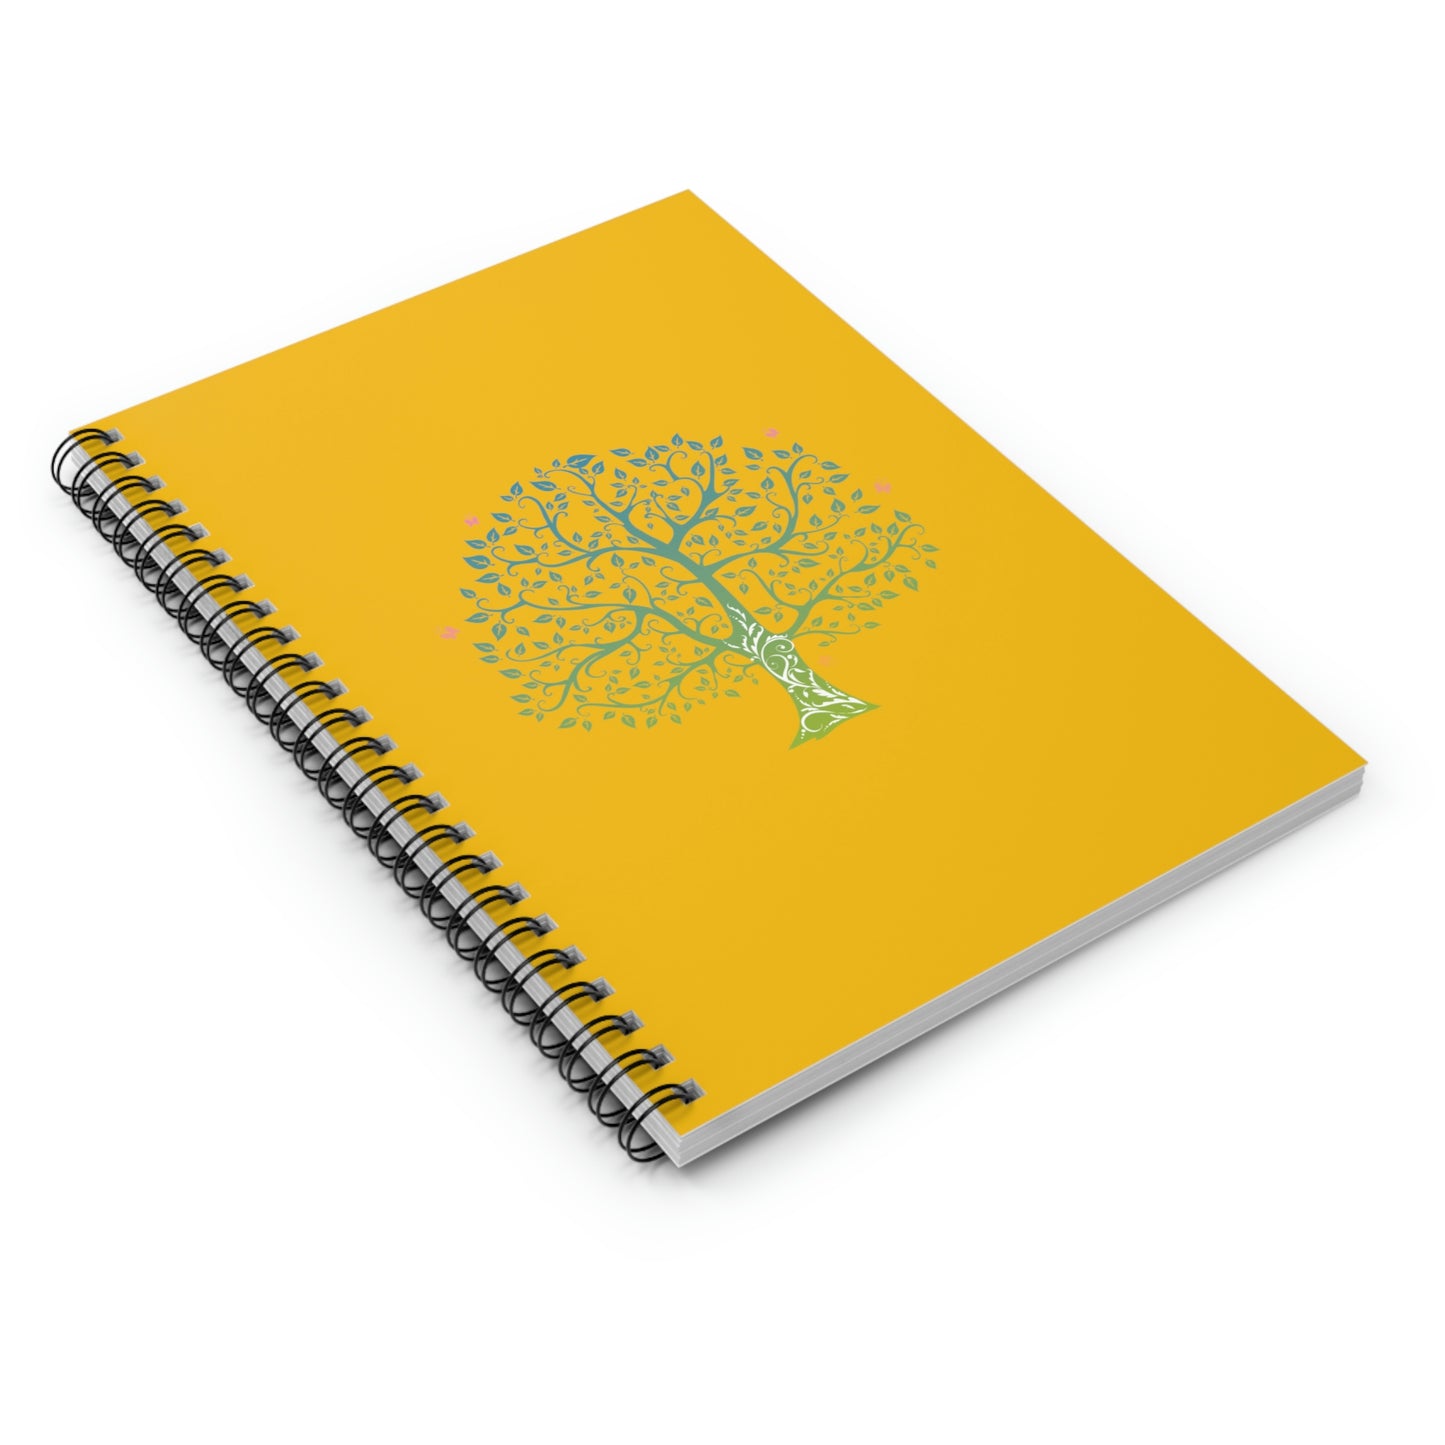 Tree of Life - Spiral Notebook - Ruled Line - Yellow Cover